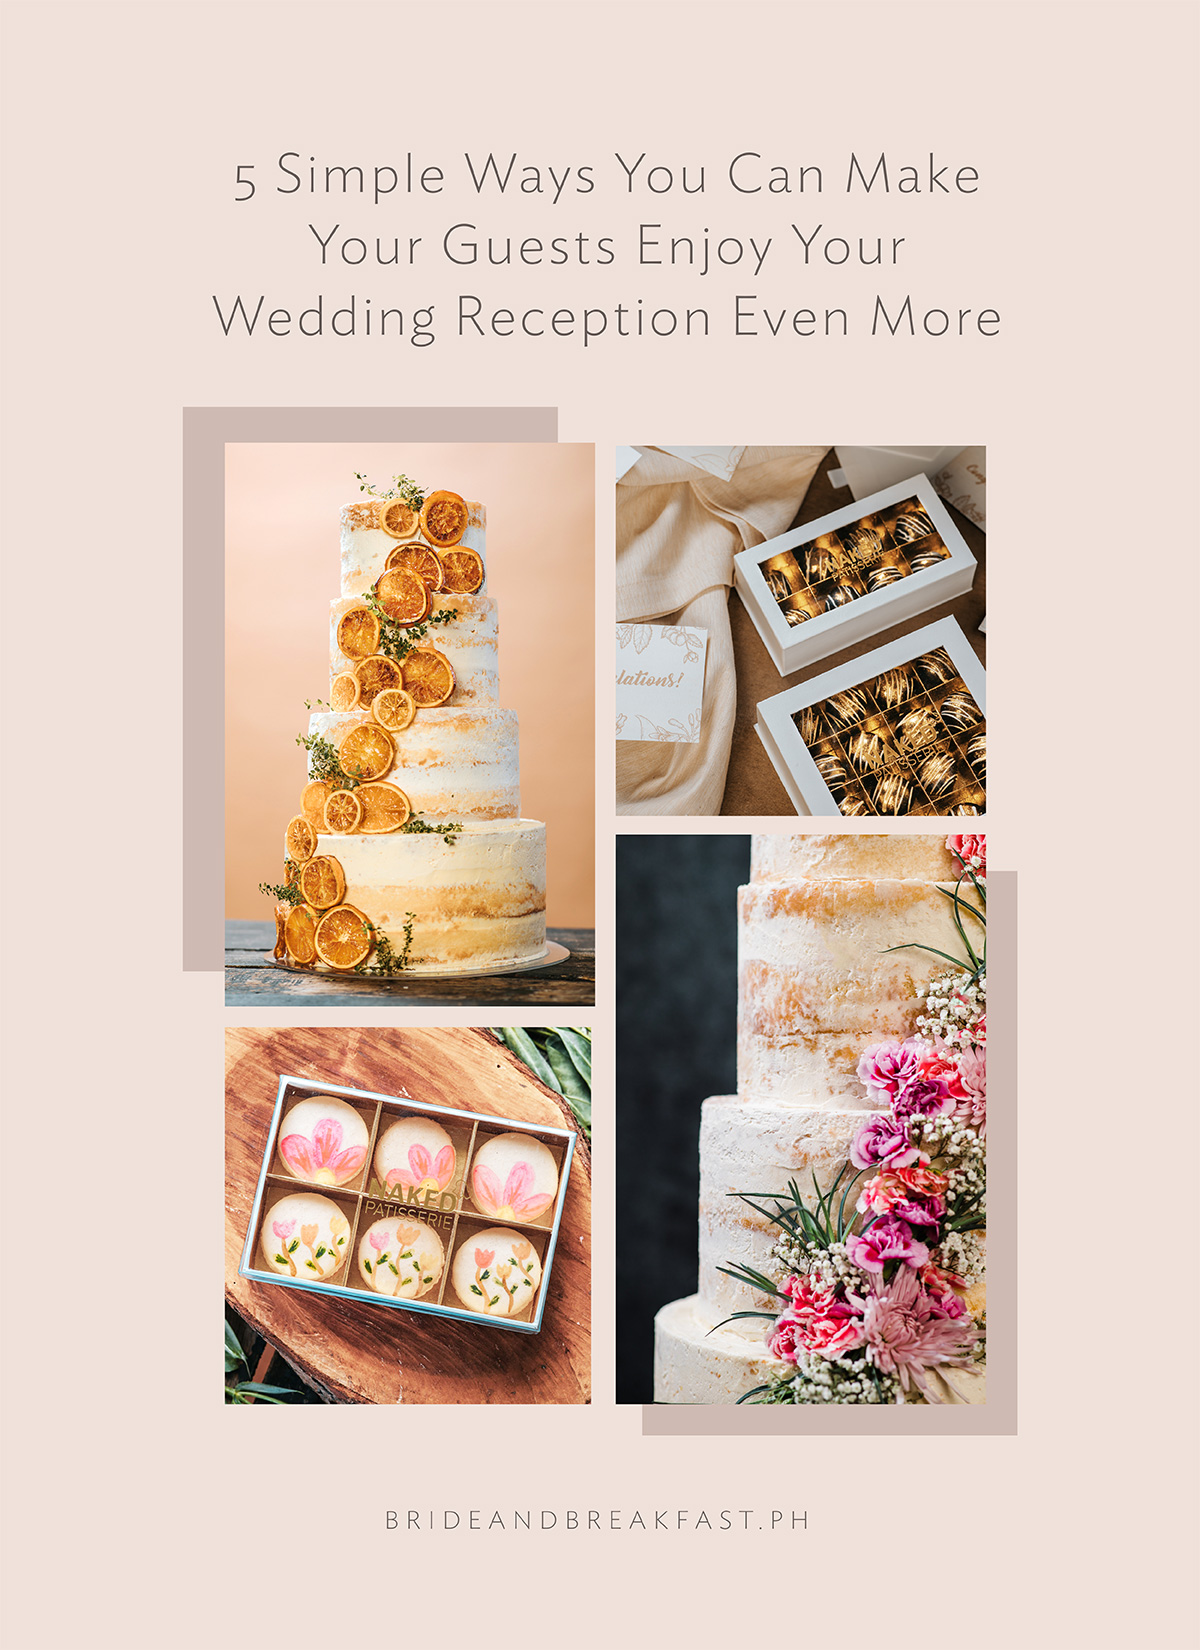 5 Simple Ways You Can Make Your Guests Enjoy Your Wedding Reception Even More